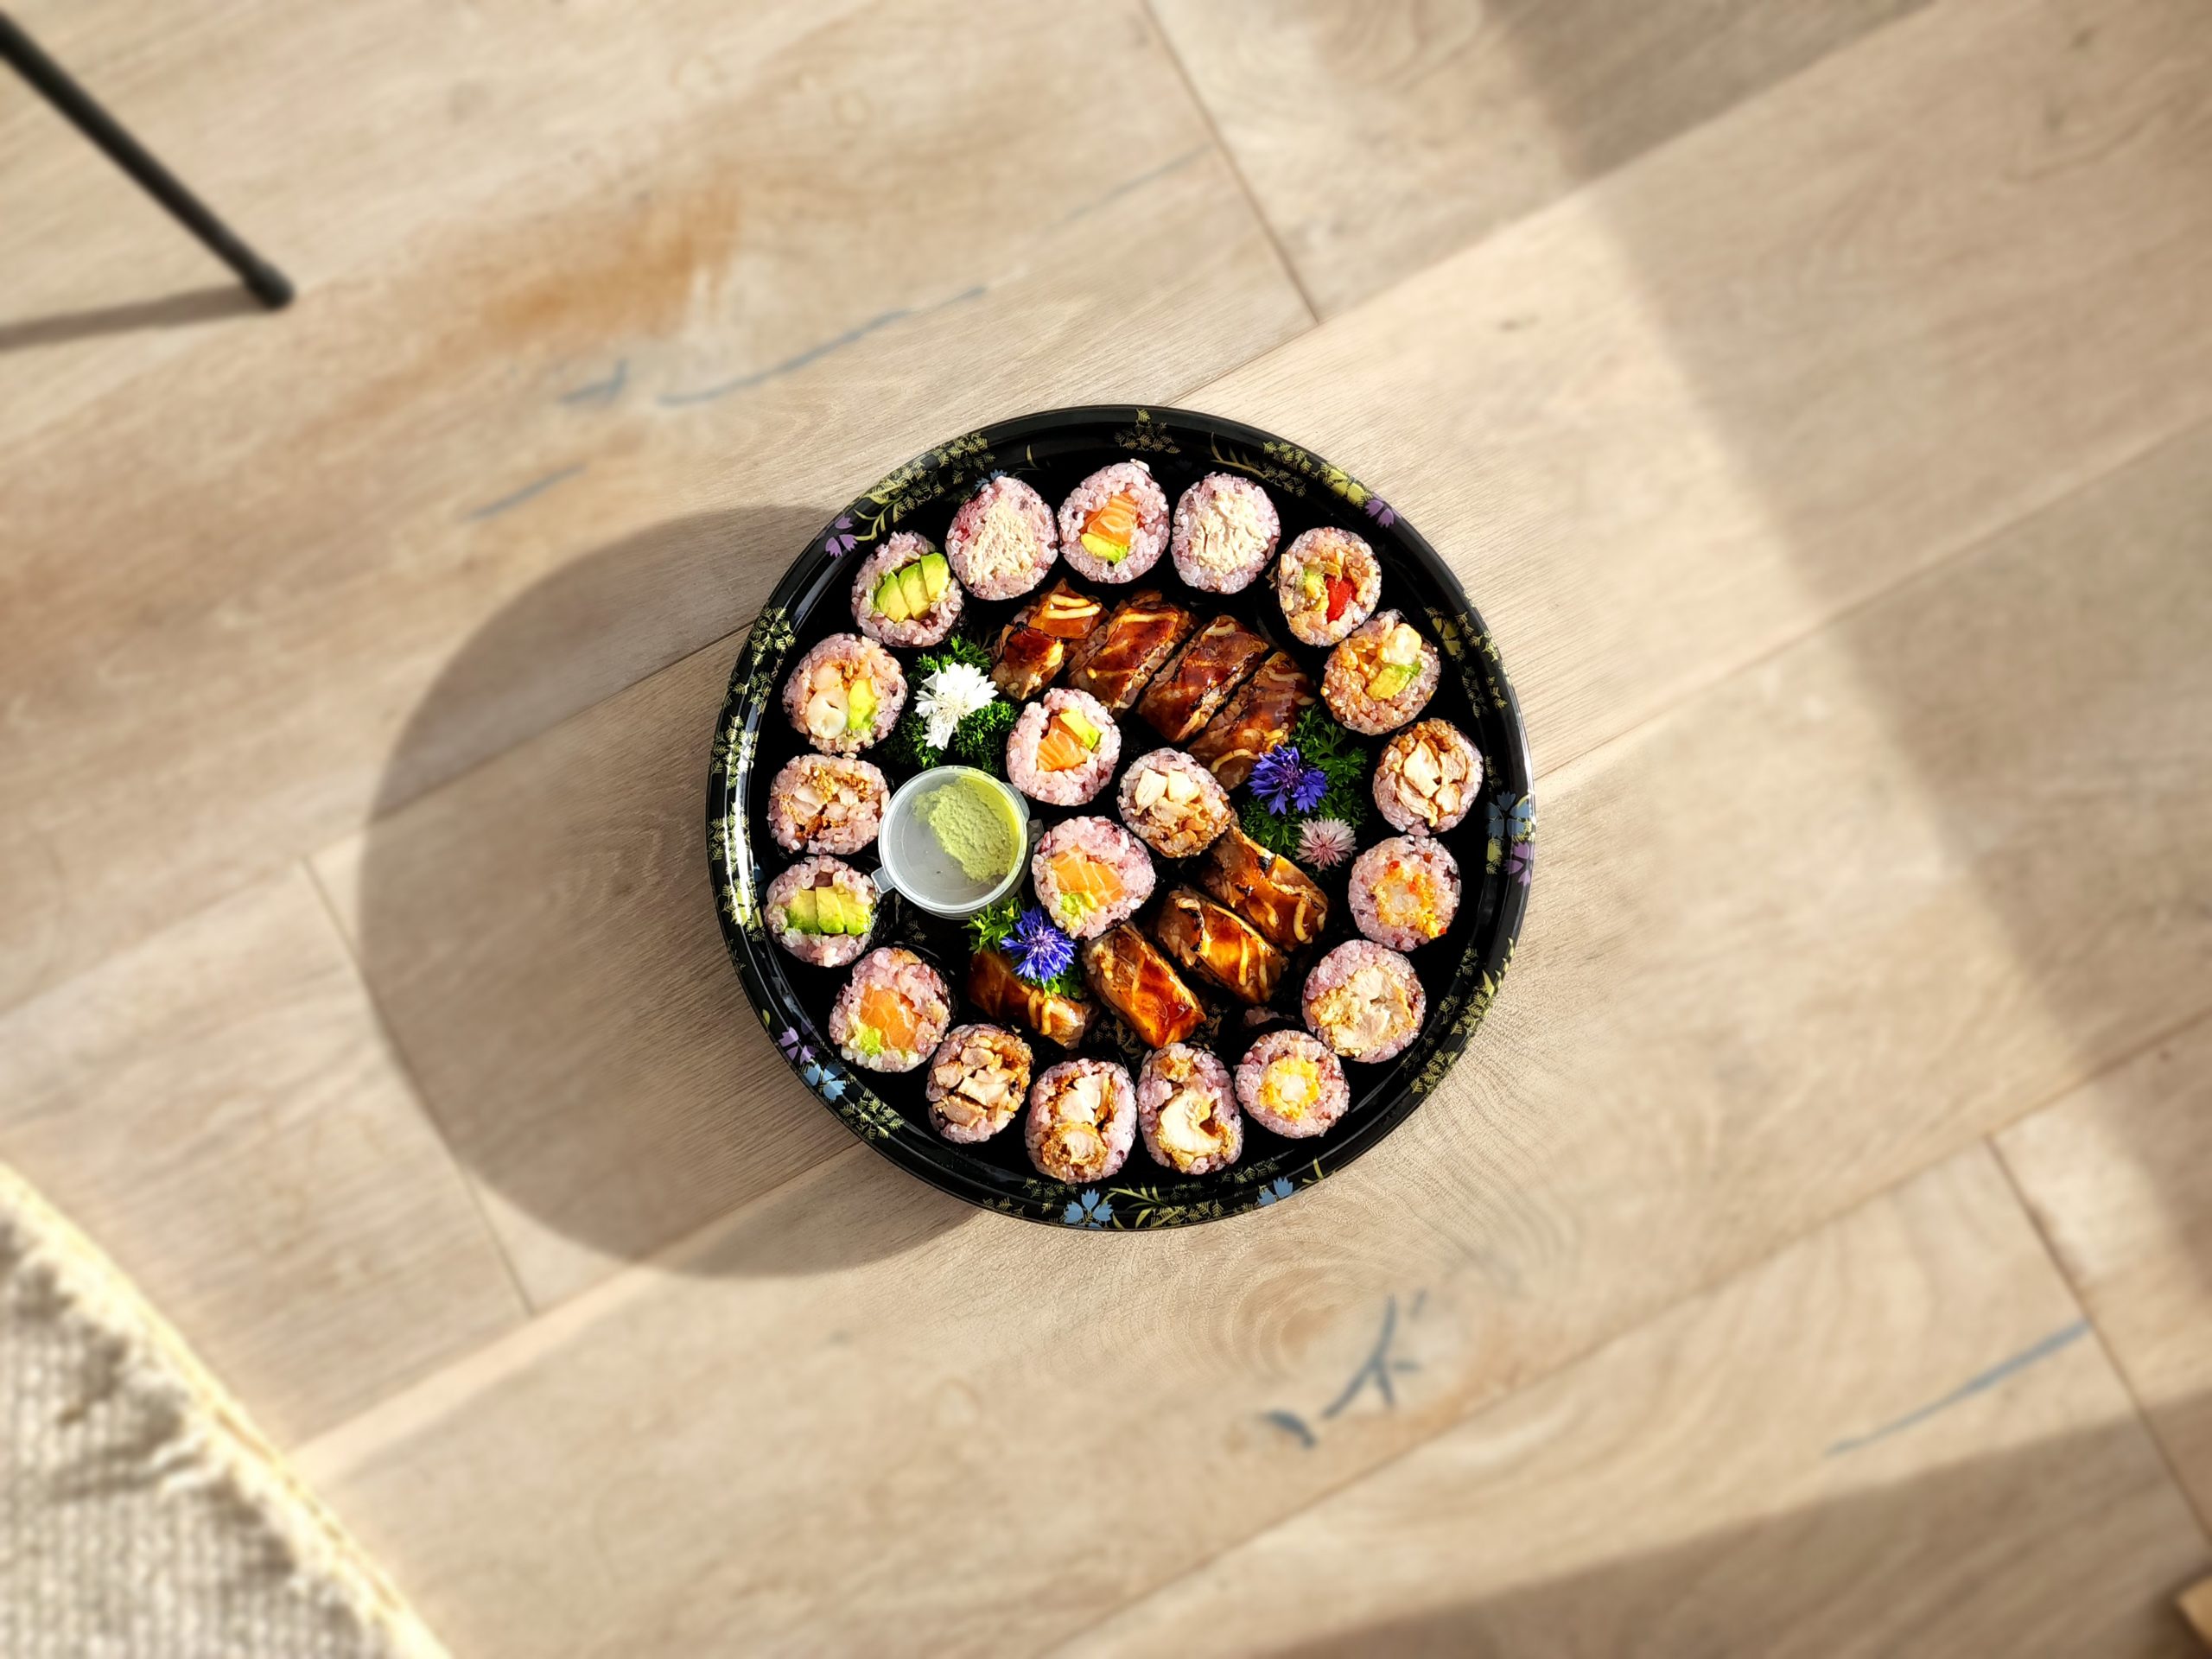 A large platter of sushi on a wooden floor